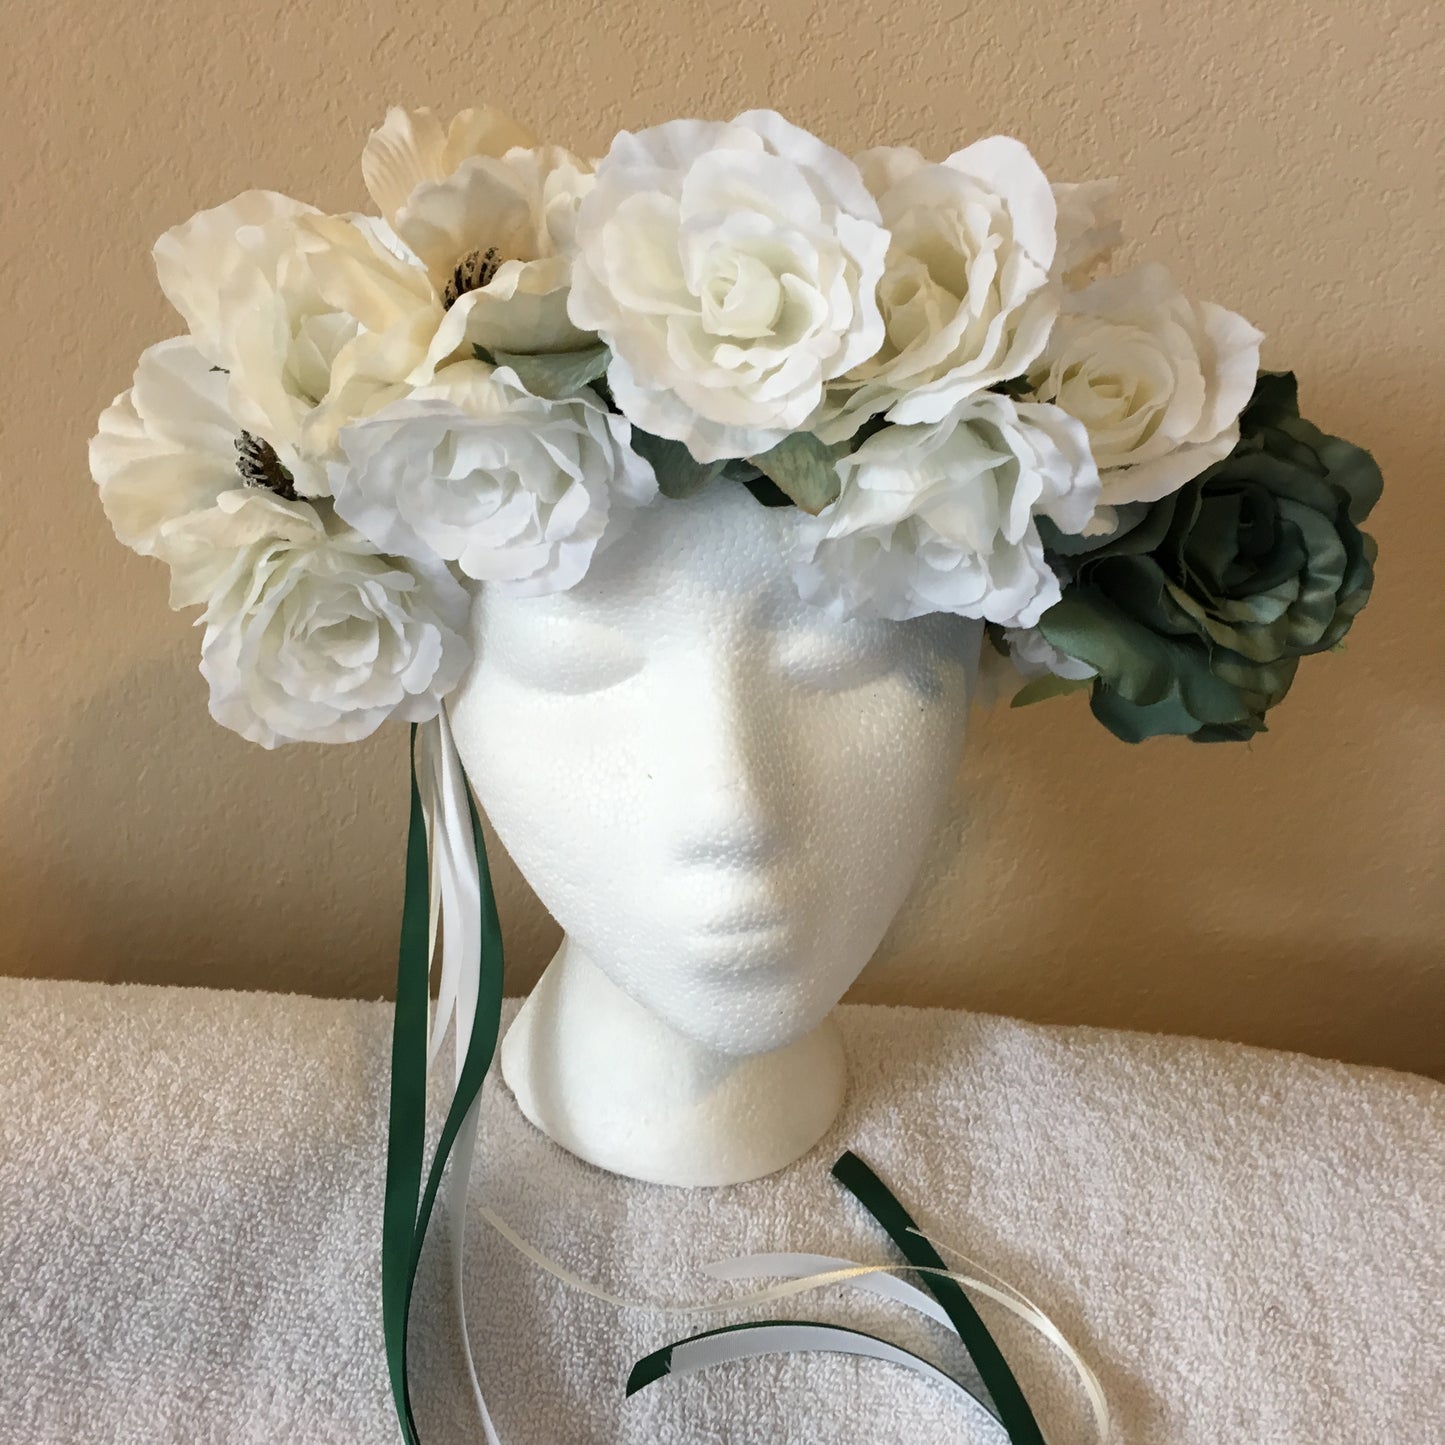 Large Wreath - Dark green roses w/ white roses & beige flower accents